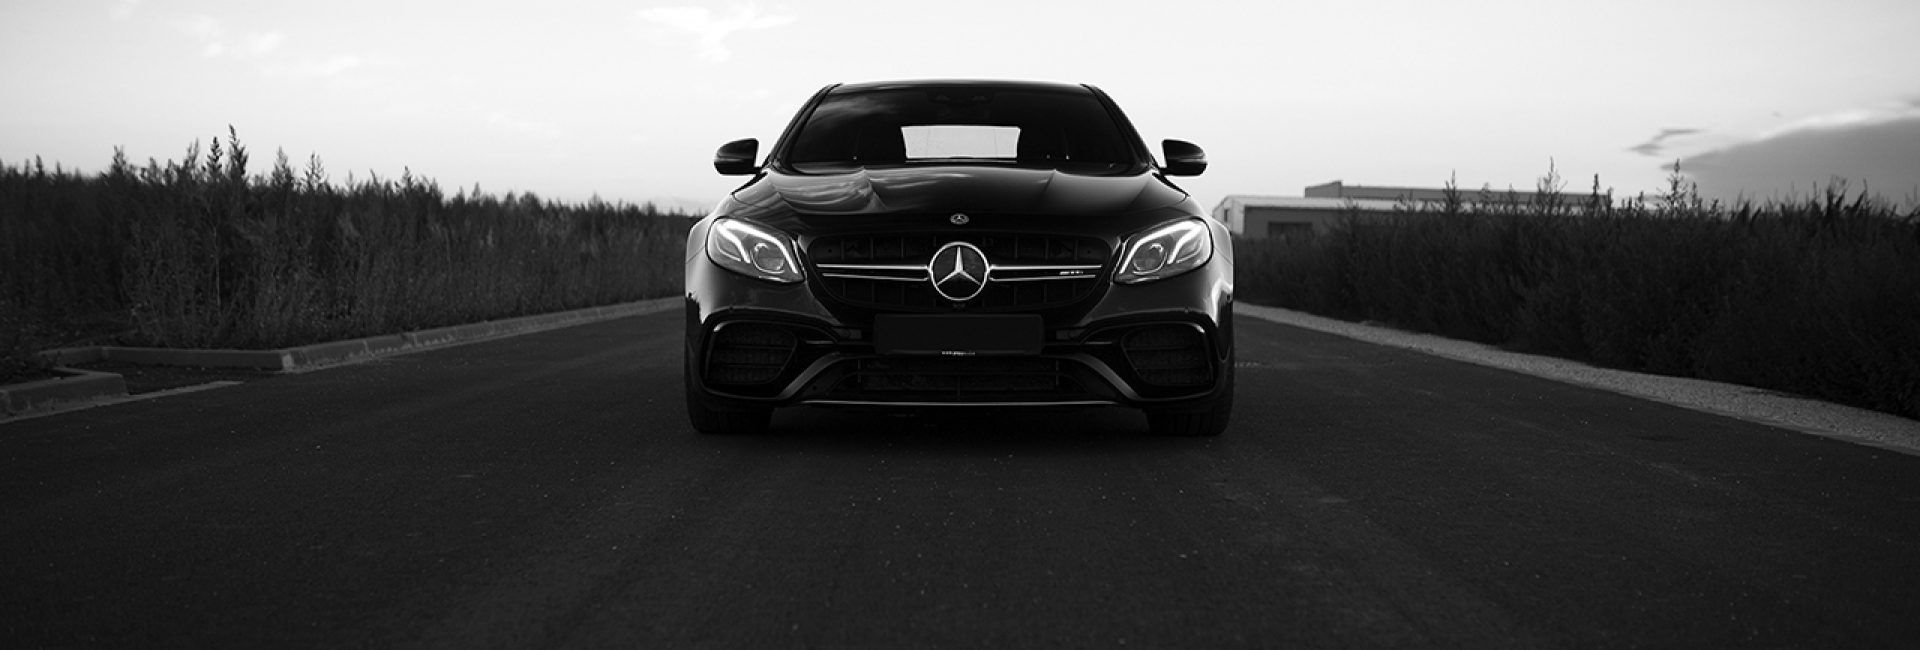 Going all Black&White with the Mercedes-Benz E63s AMG